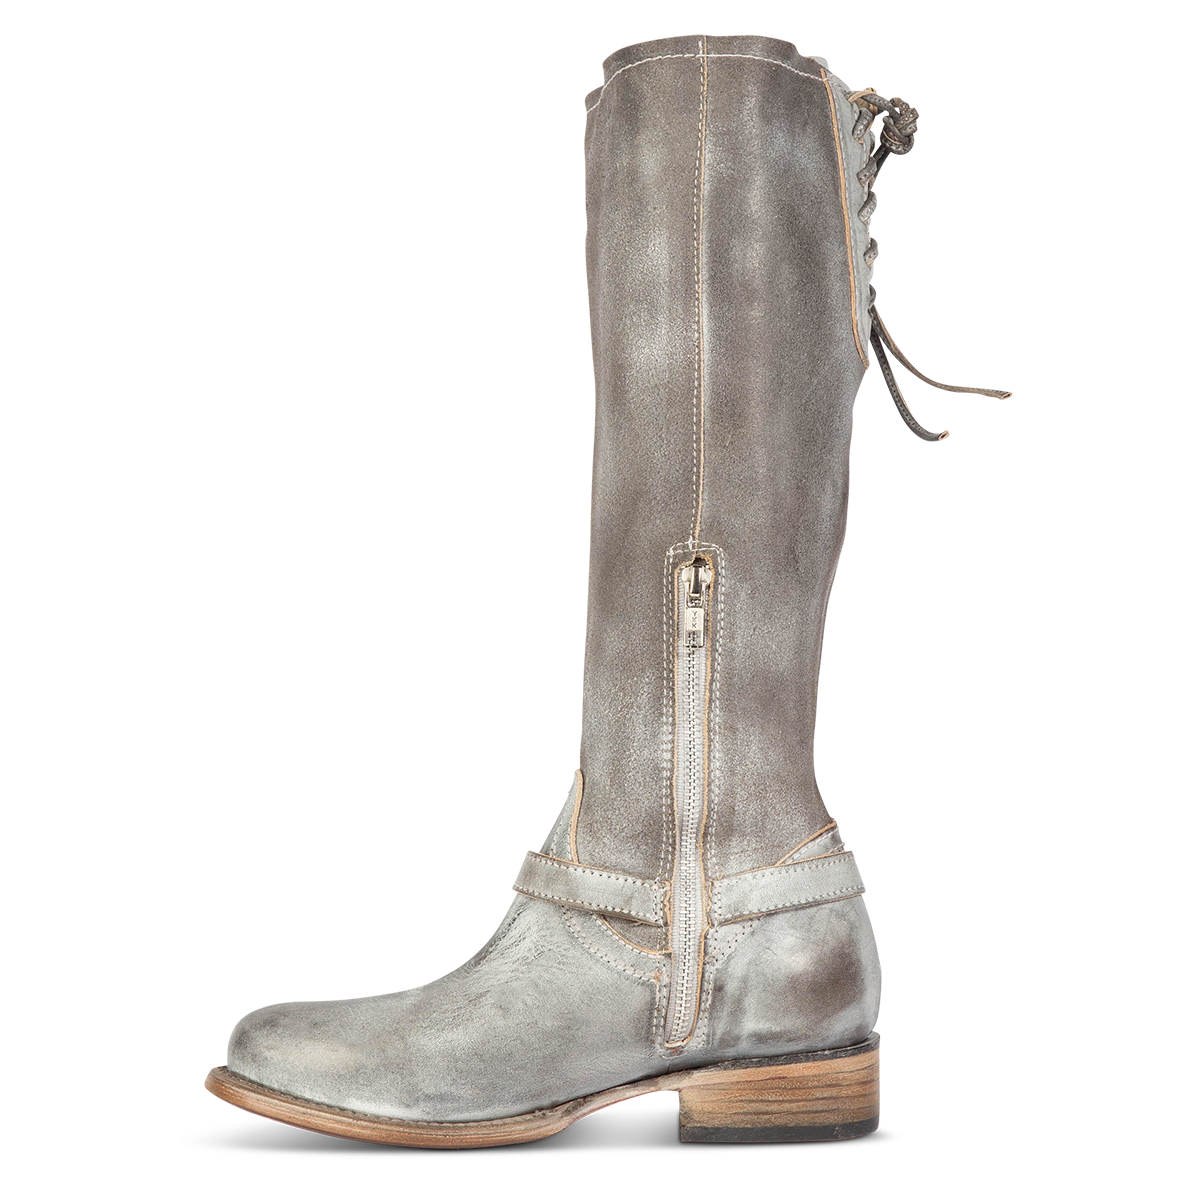 Inside view showing tall shaft construction, ankle strap with silver hardware, and inside zipper on FREEBIRD women's Raleigh stone tall leather boot